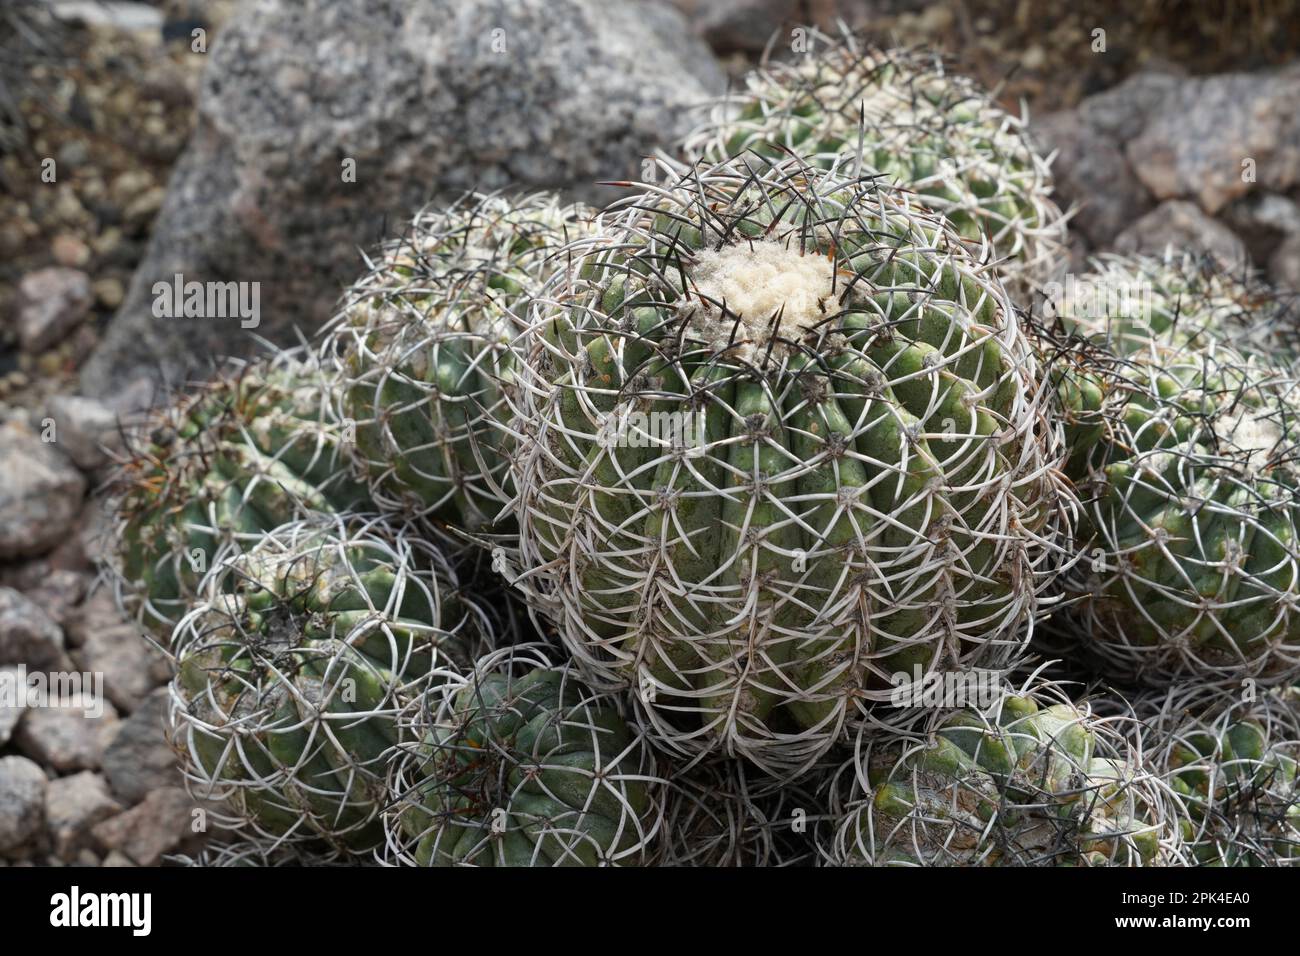 Ball cactus called in Latin Copiapoa coquimbana is a species of flowering plant in the family Cactaceae, native to Brazil. It is ribbed . Stock Photo